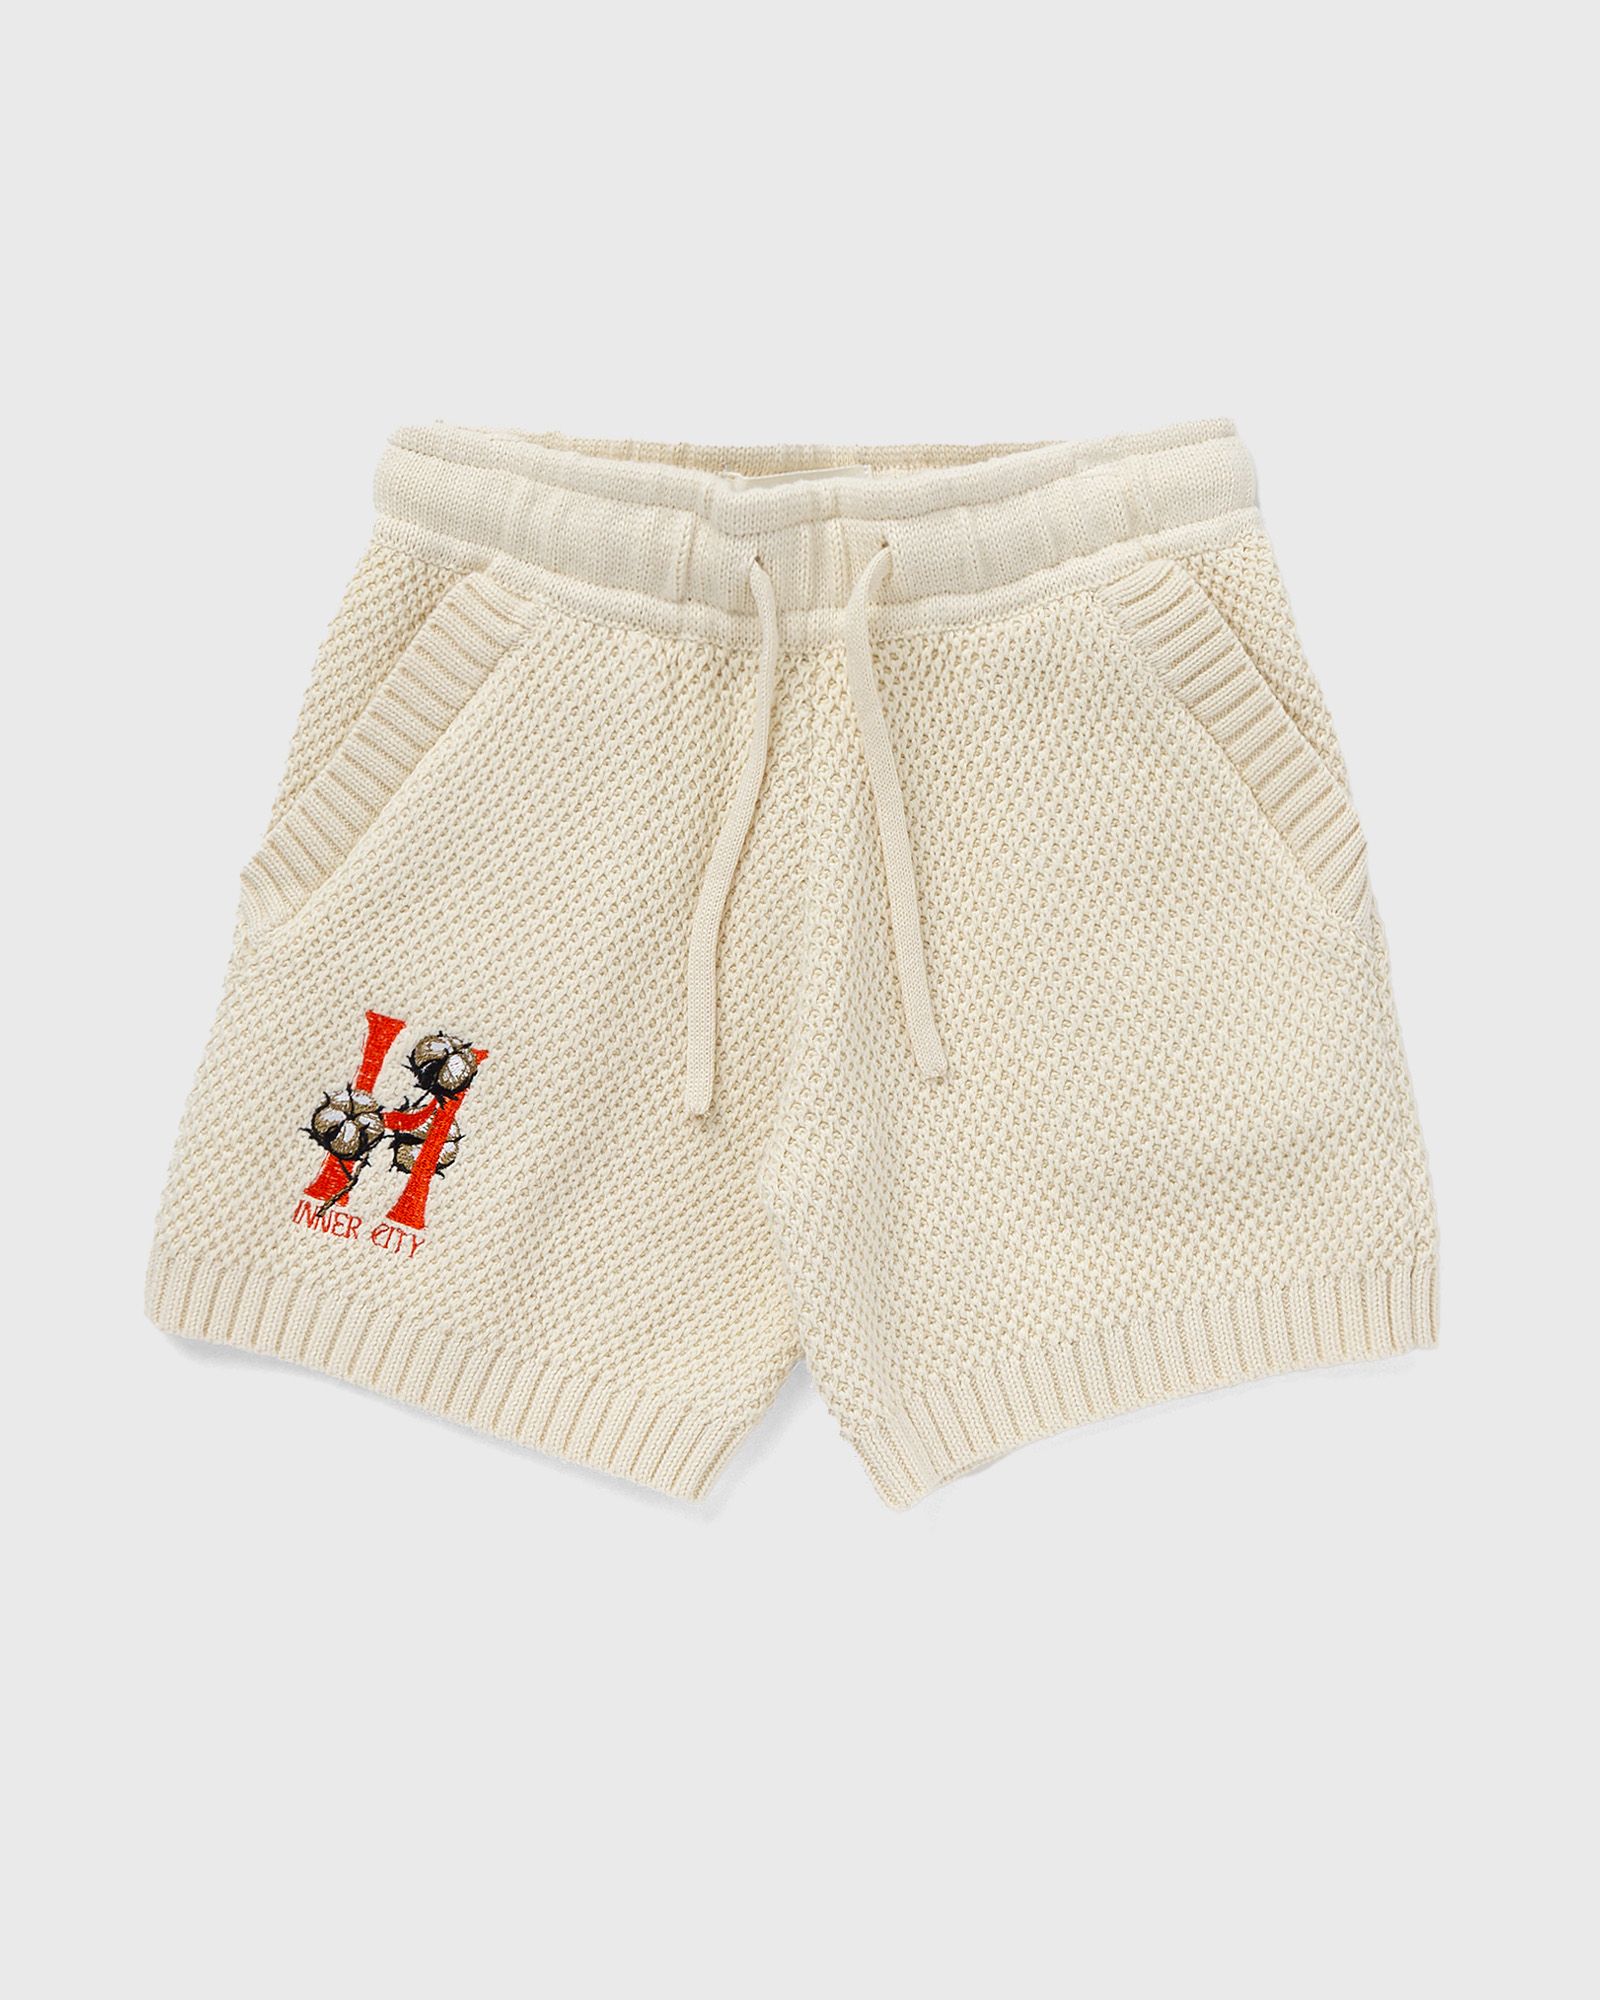 Honor The Gift - knit h shorts  shorts white in größe:4-6